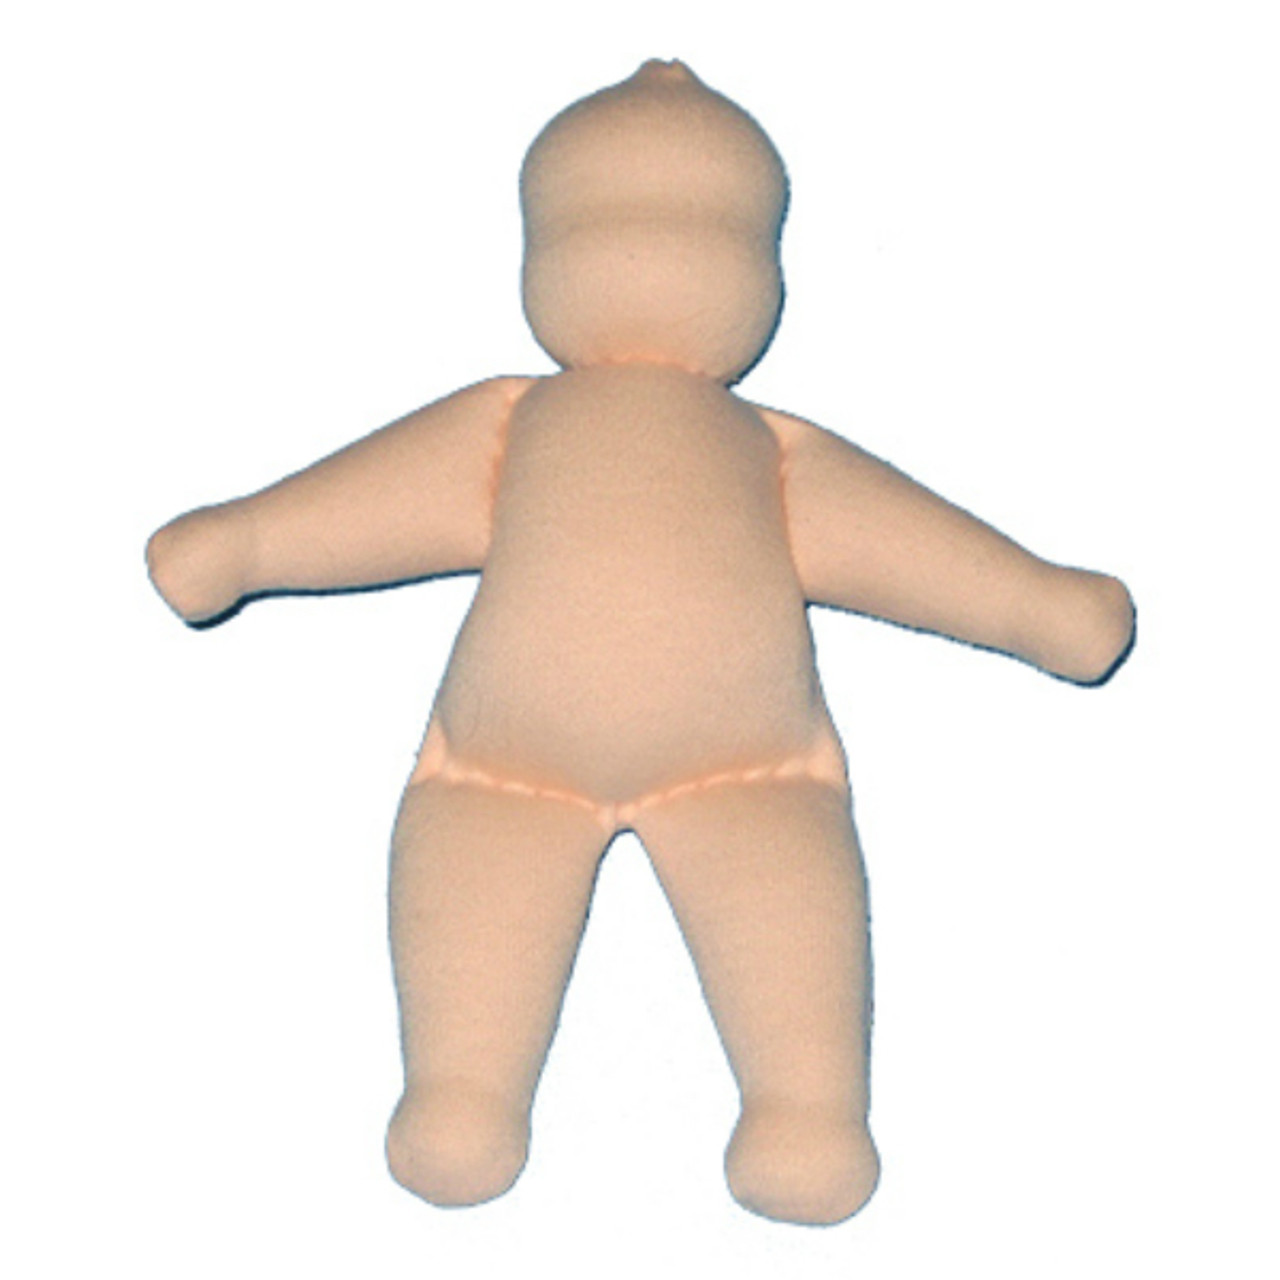 Bendy Rope Doll Body - Small - A Child's Dream